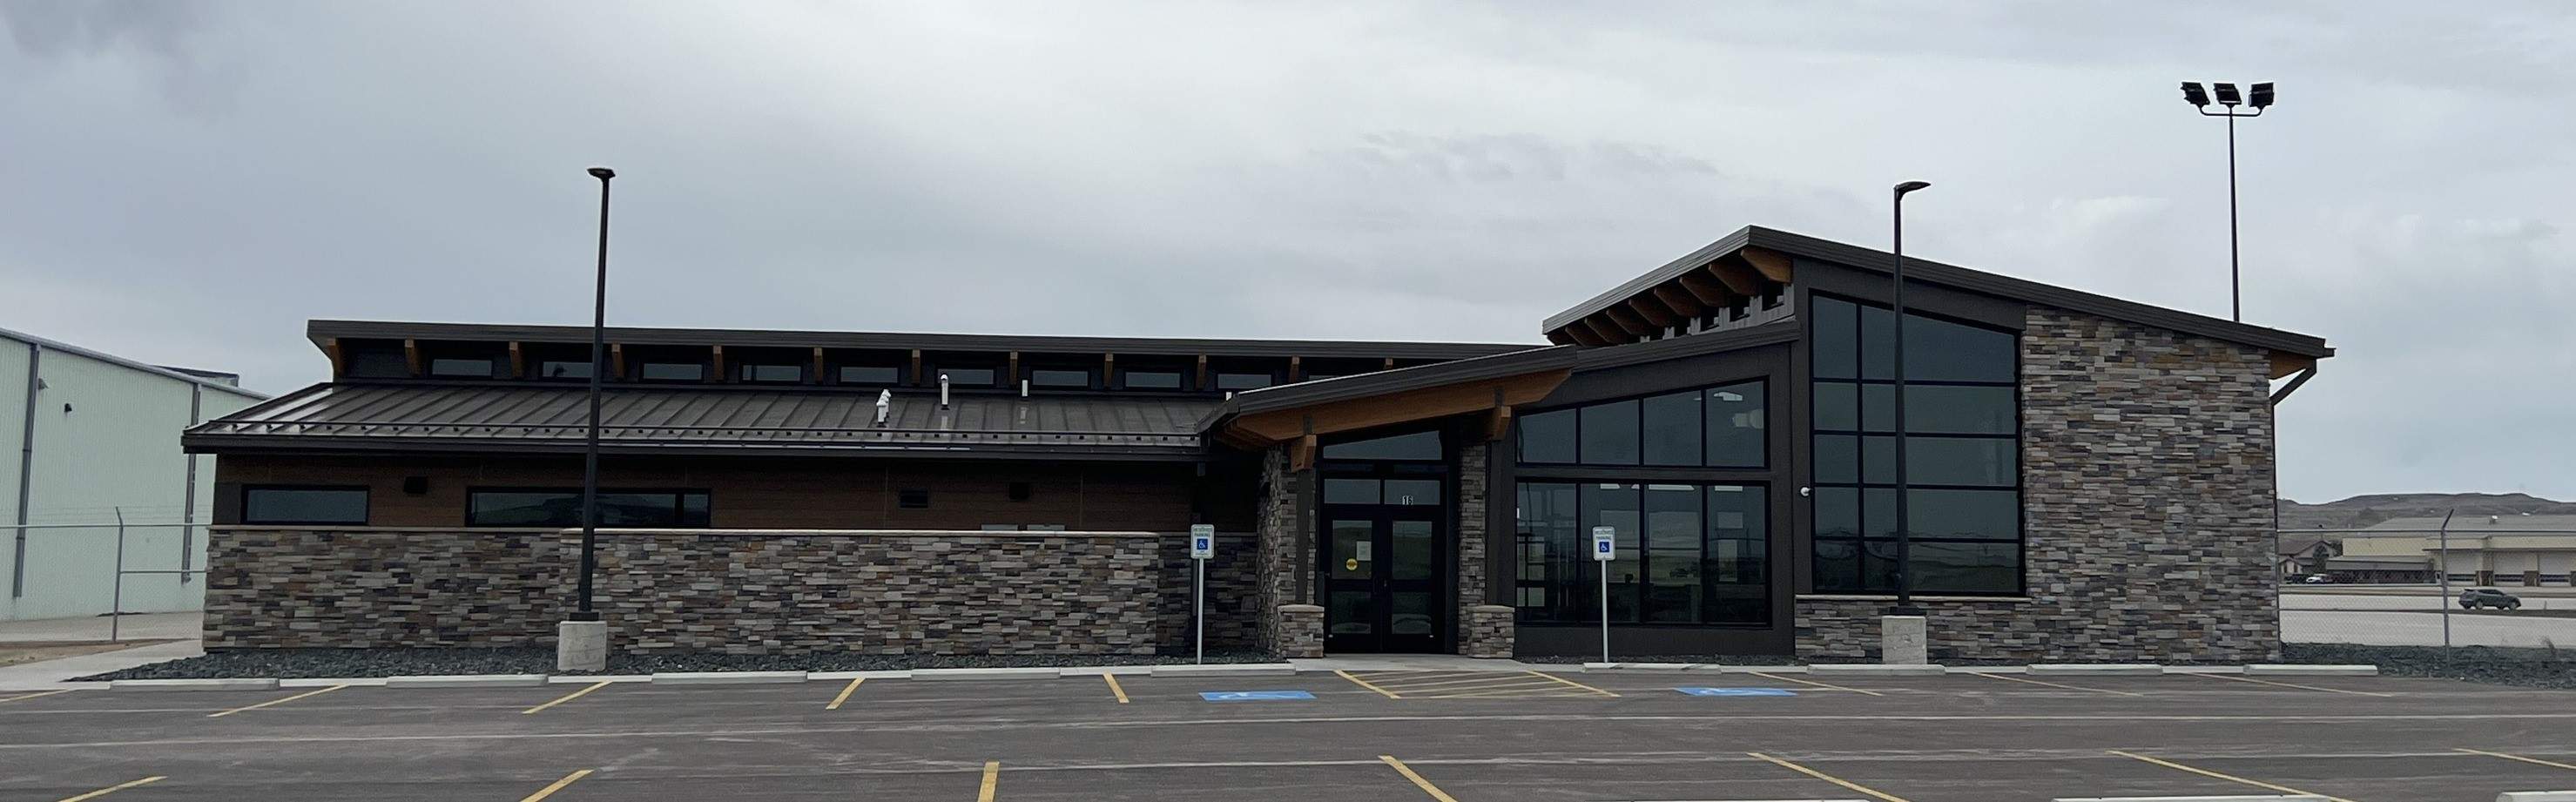 GateOne to open at Northeast Wyoming Regional Airport/KGCC